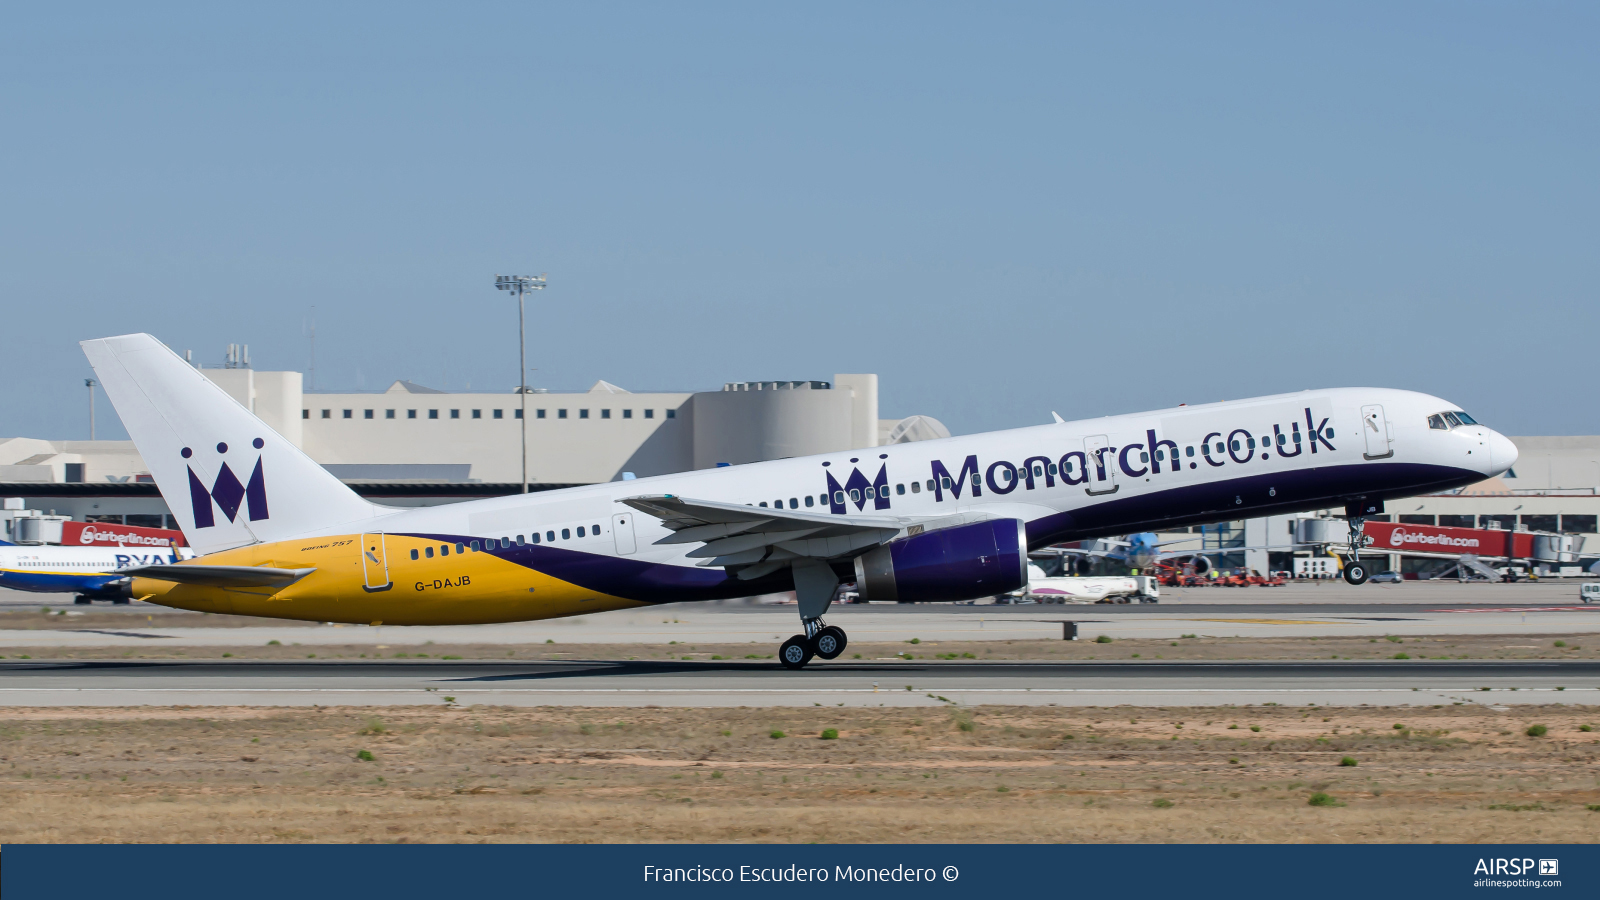 Monarch Airlines  Boeing 757-200  G-DAJB